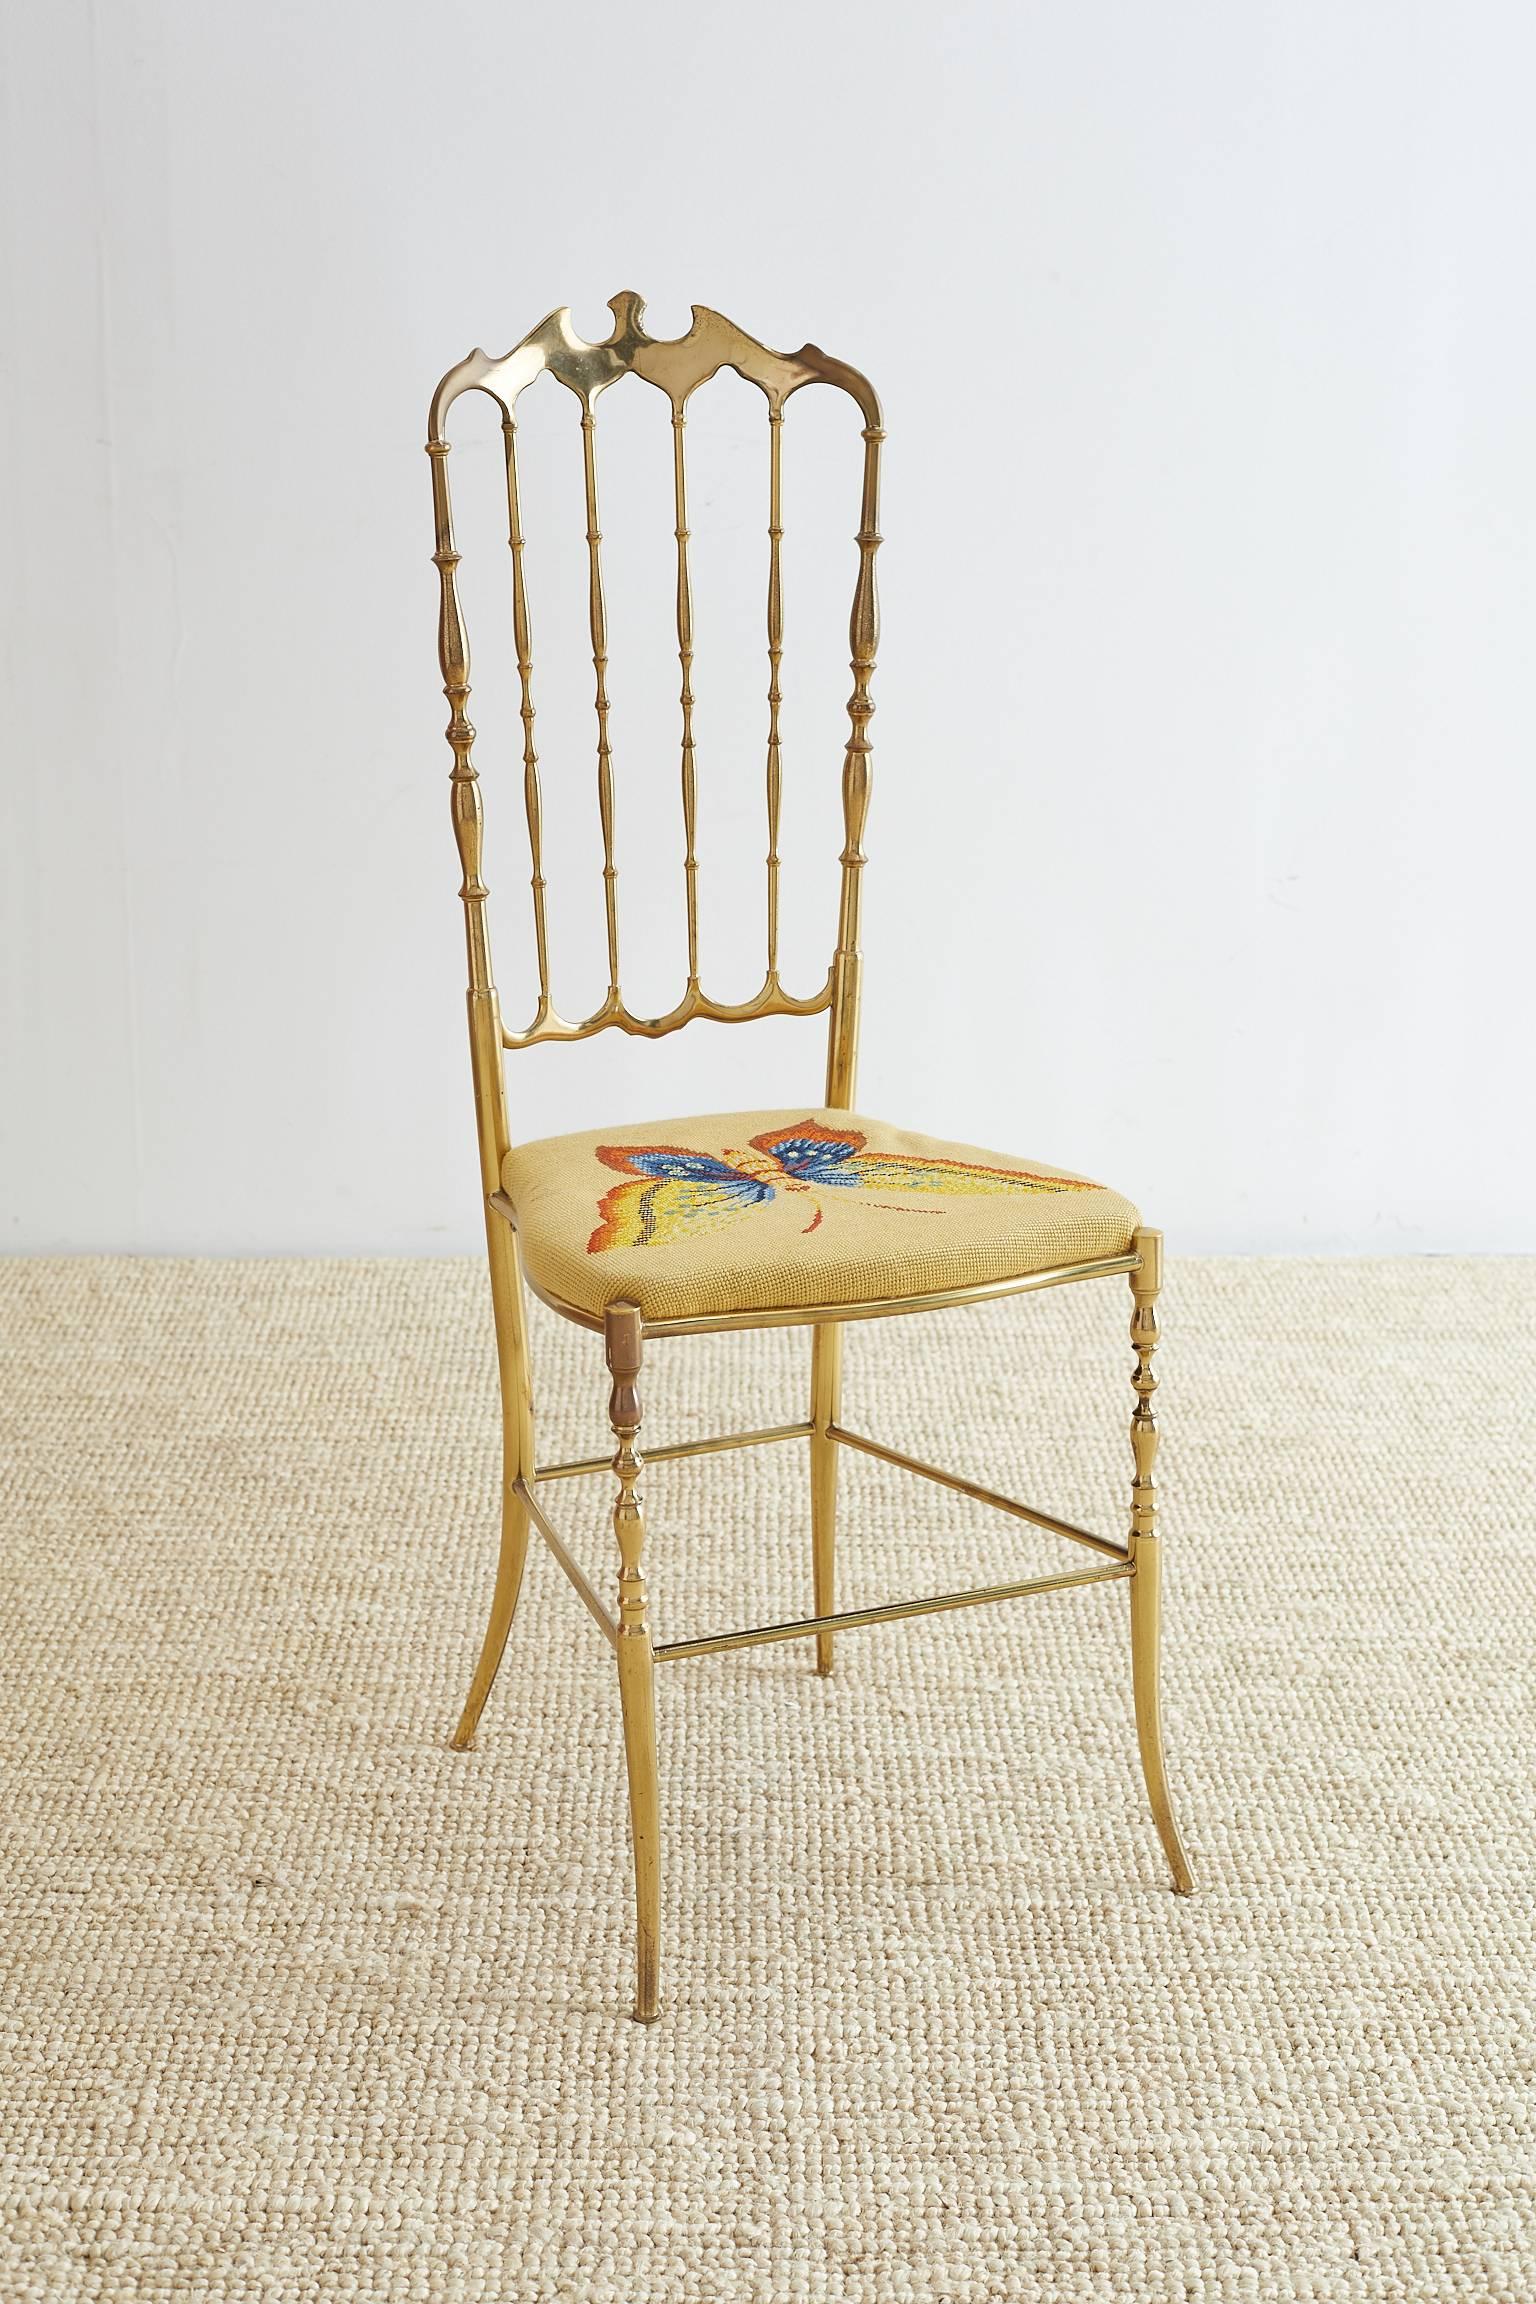 Mid-Century Modern Italian brass chiavari chair featuring a butterfly needlepoint upholstered seat. This chair was made with a high back 40 inch frame and a beautiful polished finish that now has a vintage brass patina.
